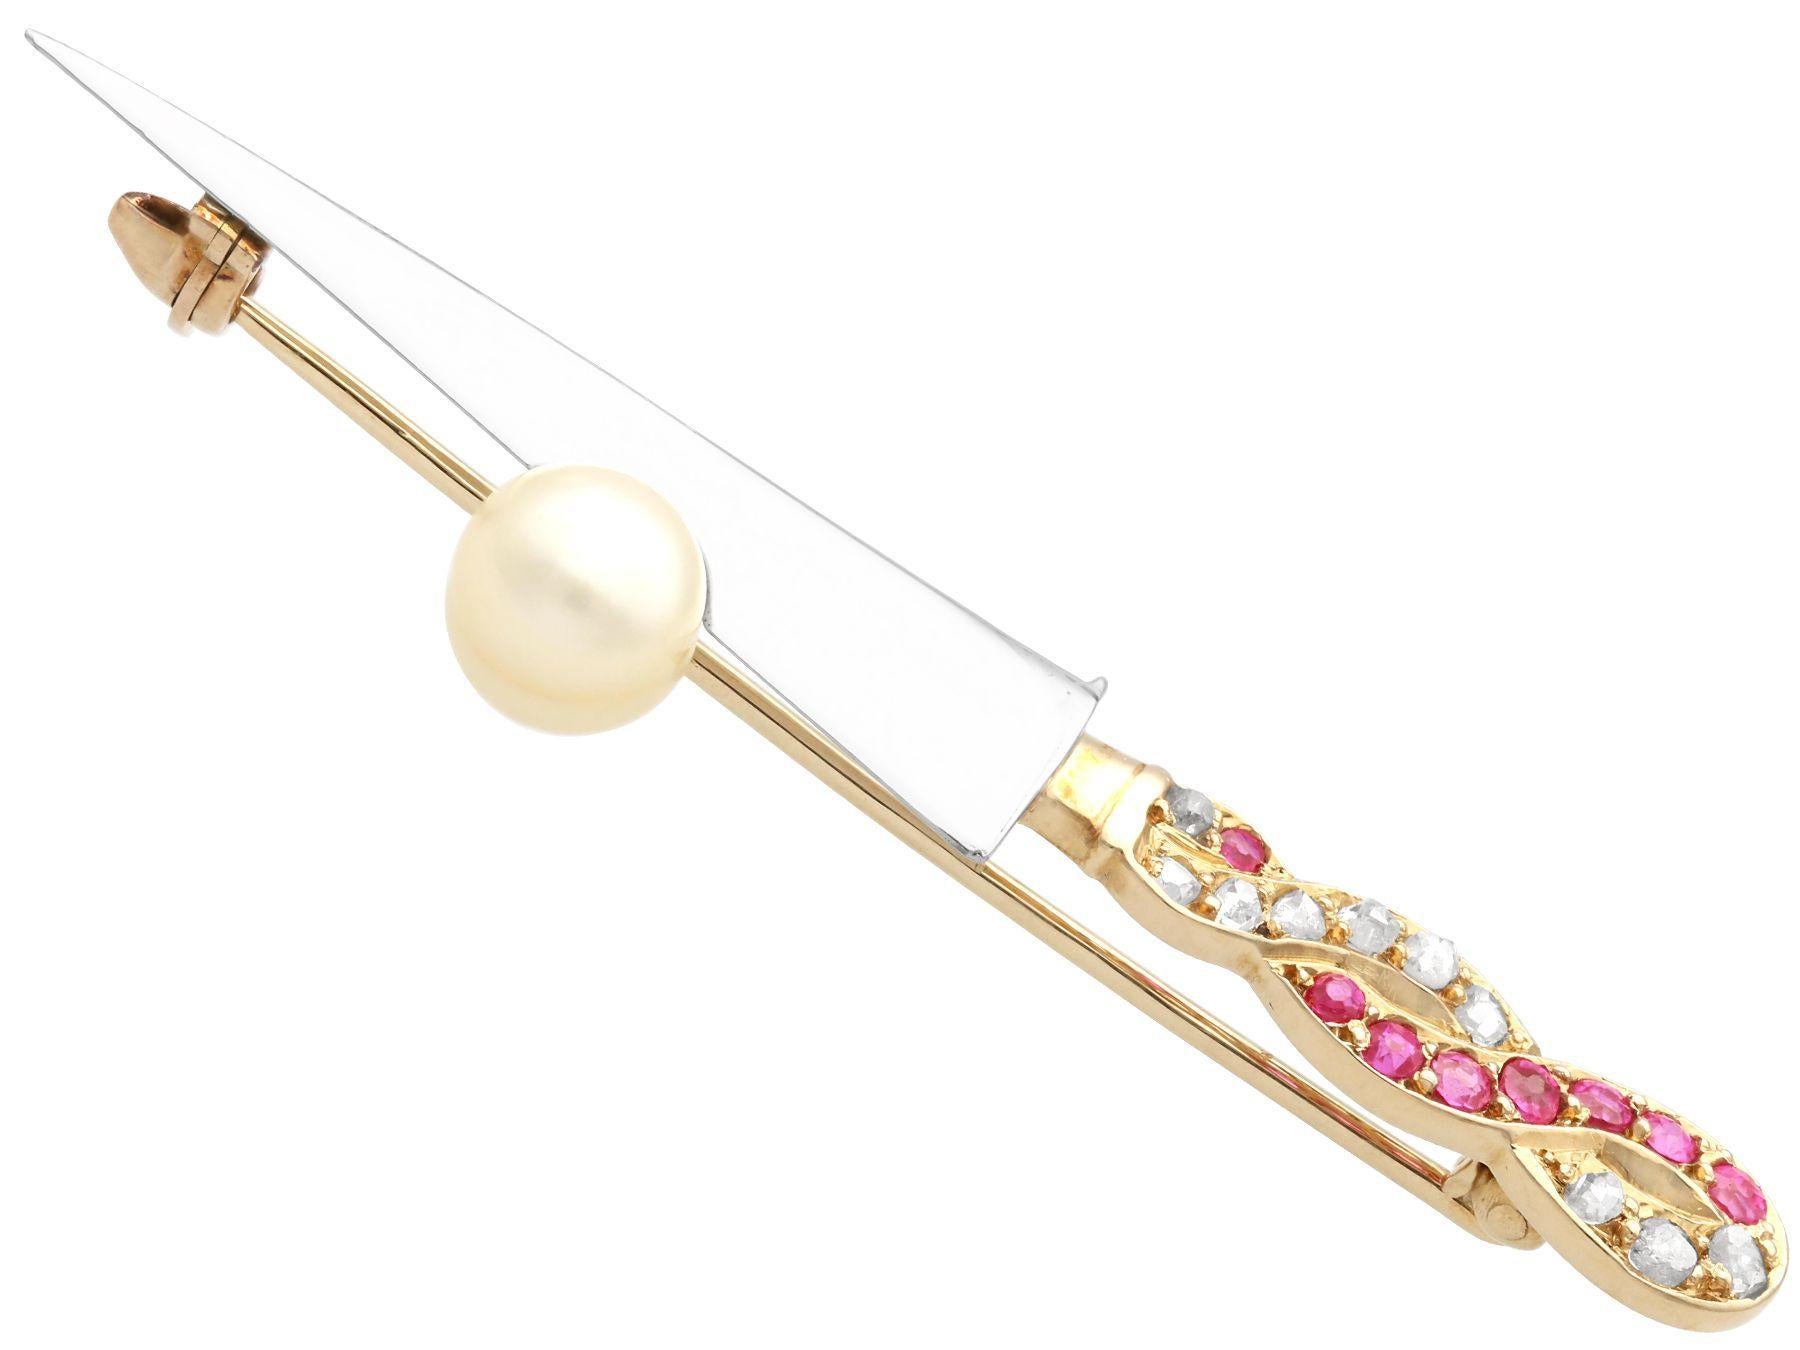 Vintage 1950s Pearl Ruby and Diamond and Yellow Gold Sword Brooch In Excellent Condition For Sale In Jesmond, Newcastle Upon Tyne